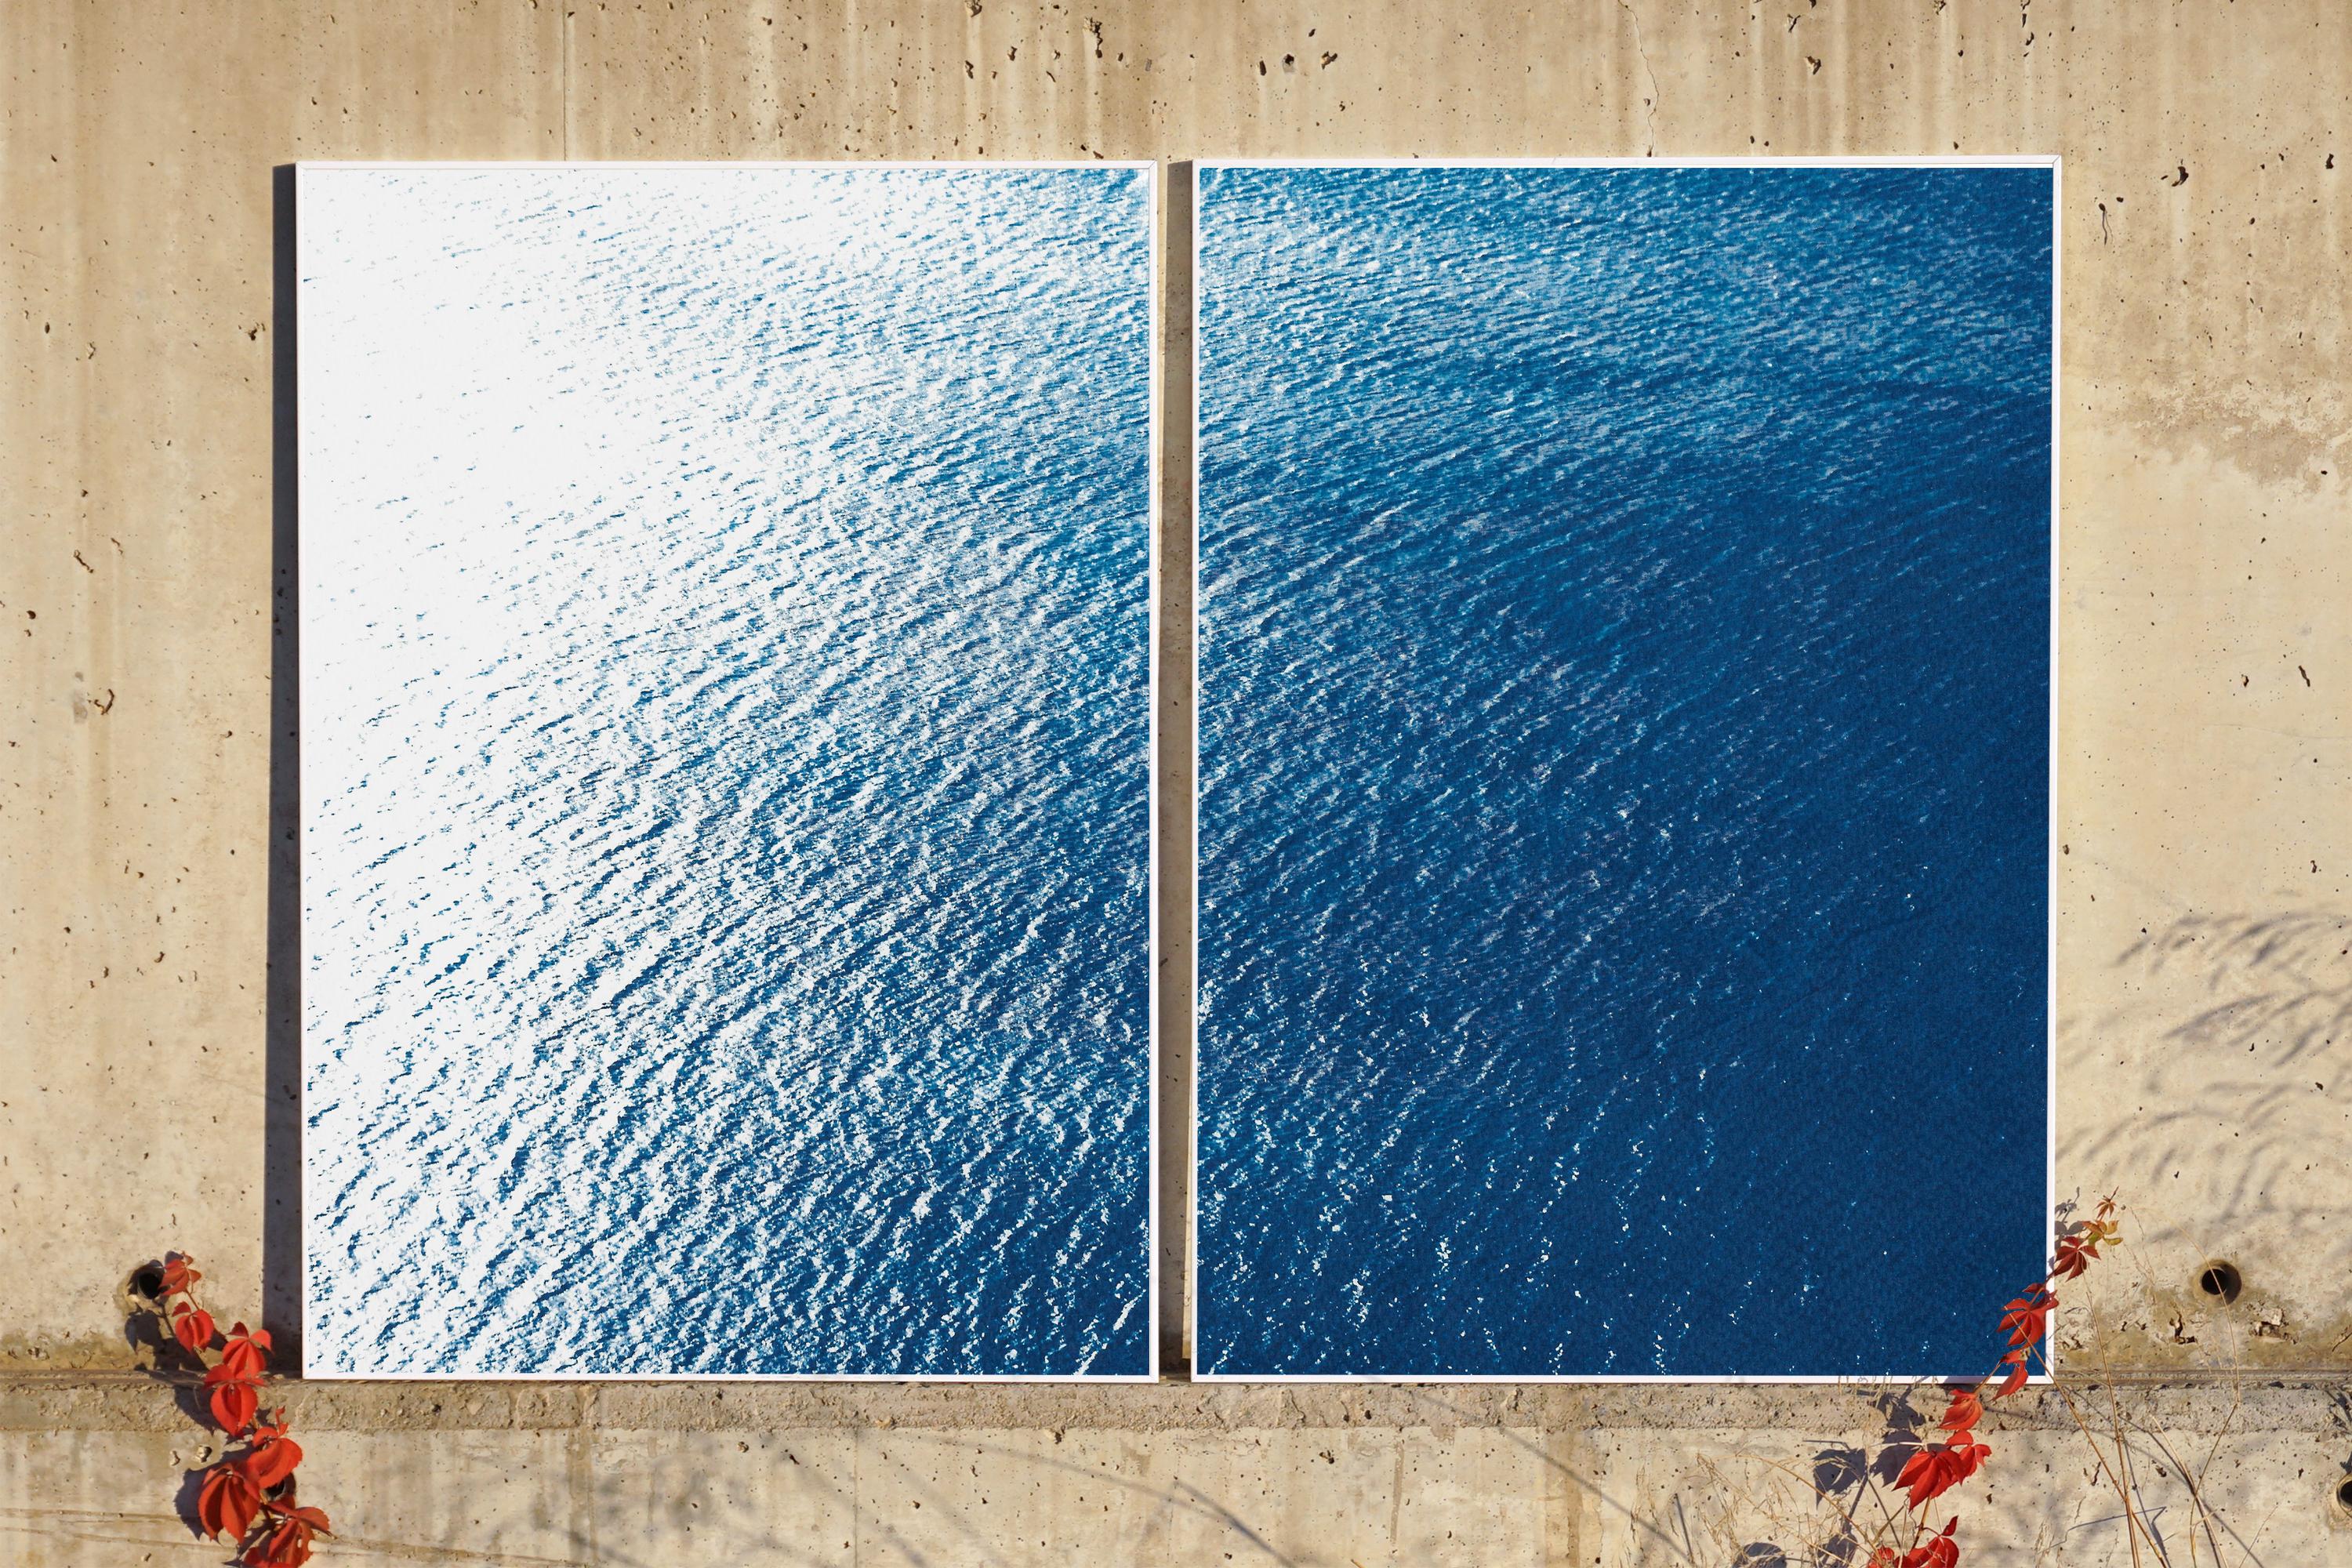 Smooth Bay in the Mediterranean, Classic Blue Diptych, Zen Seascape Coastal Life - Print by Kind of Cyan